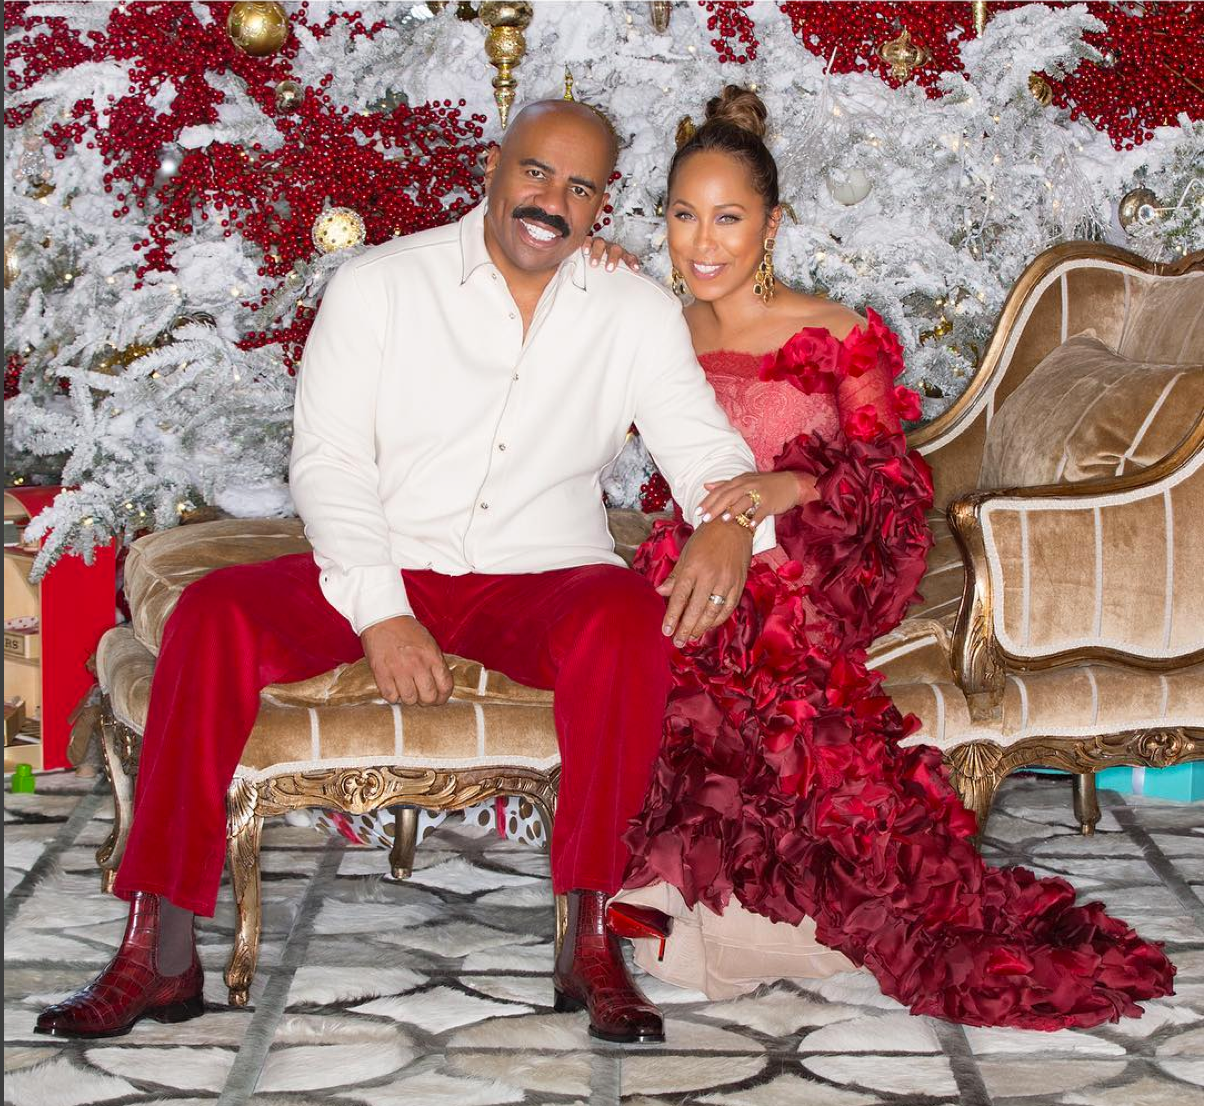 We're Convinced the Harveys Had the Most Glamorous Holiday Celebration
